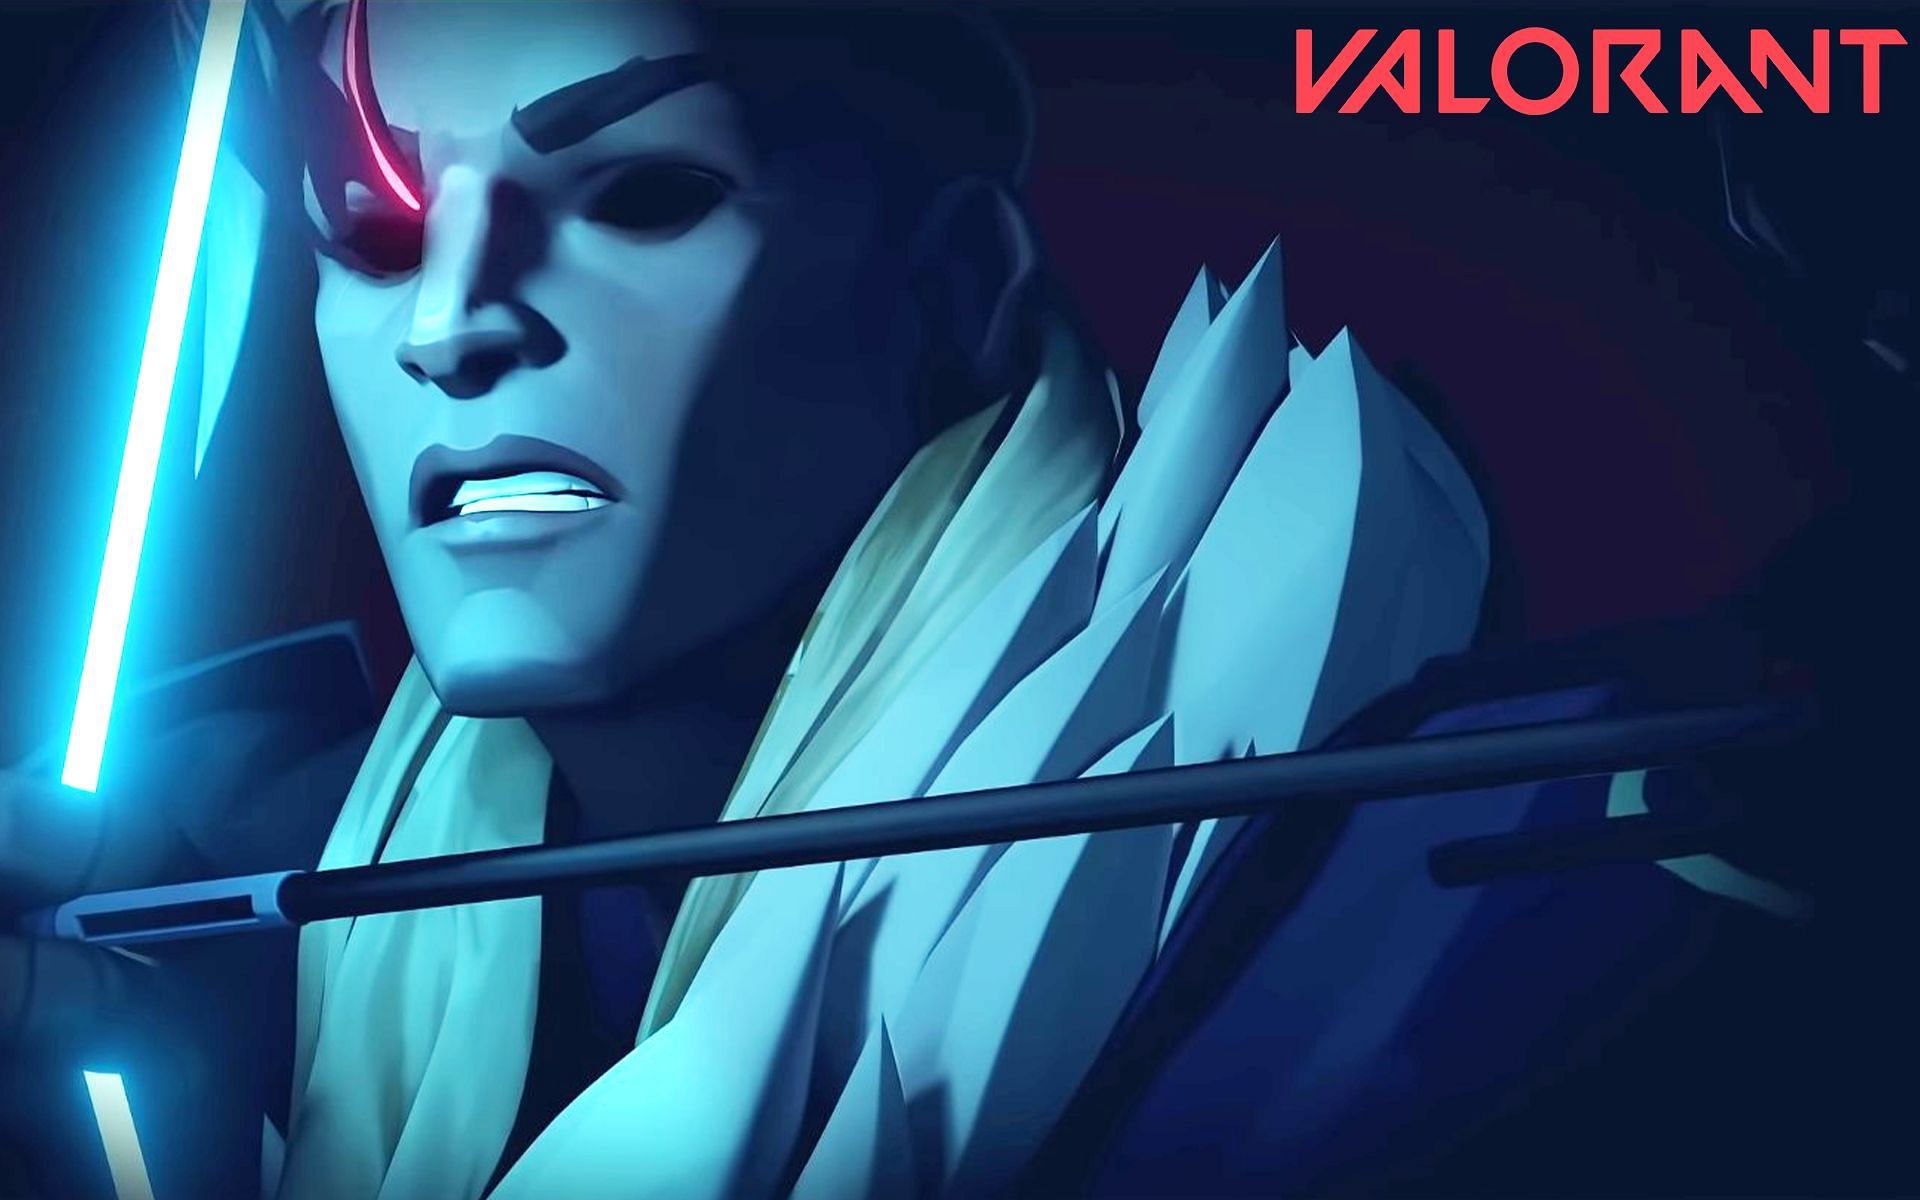 Sova will deal less damage with his Shock Darts in Valorant Episode 4 Act 3 (Image via Riot Games)